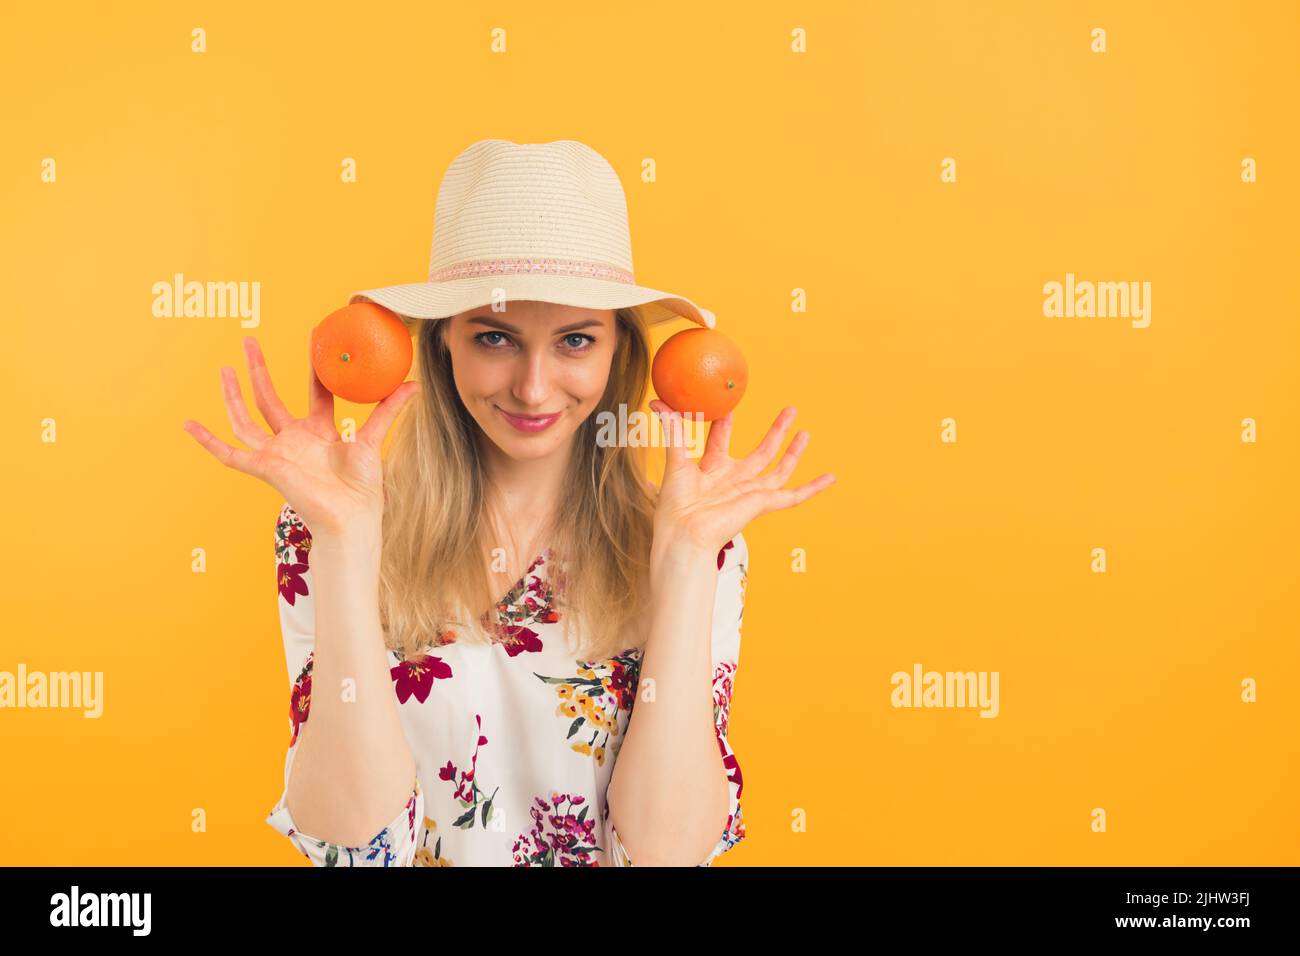 European thin blonde attractive woman in her mid 20s wearing a hat and a floral blouse showing to the camera two juicy oranges over orange background. High quality photo Stock Photo